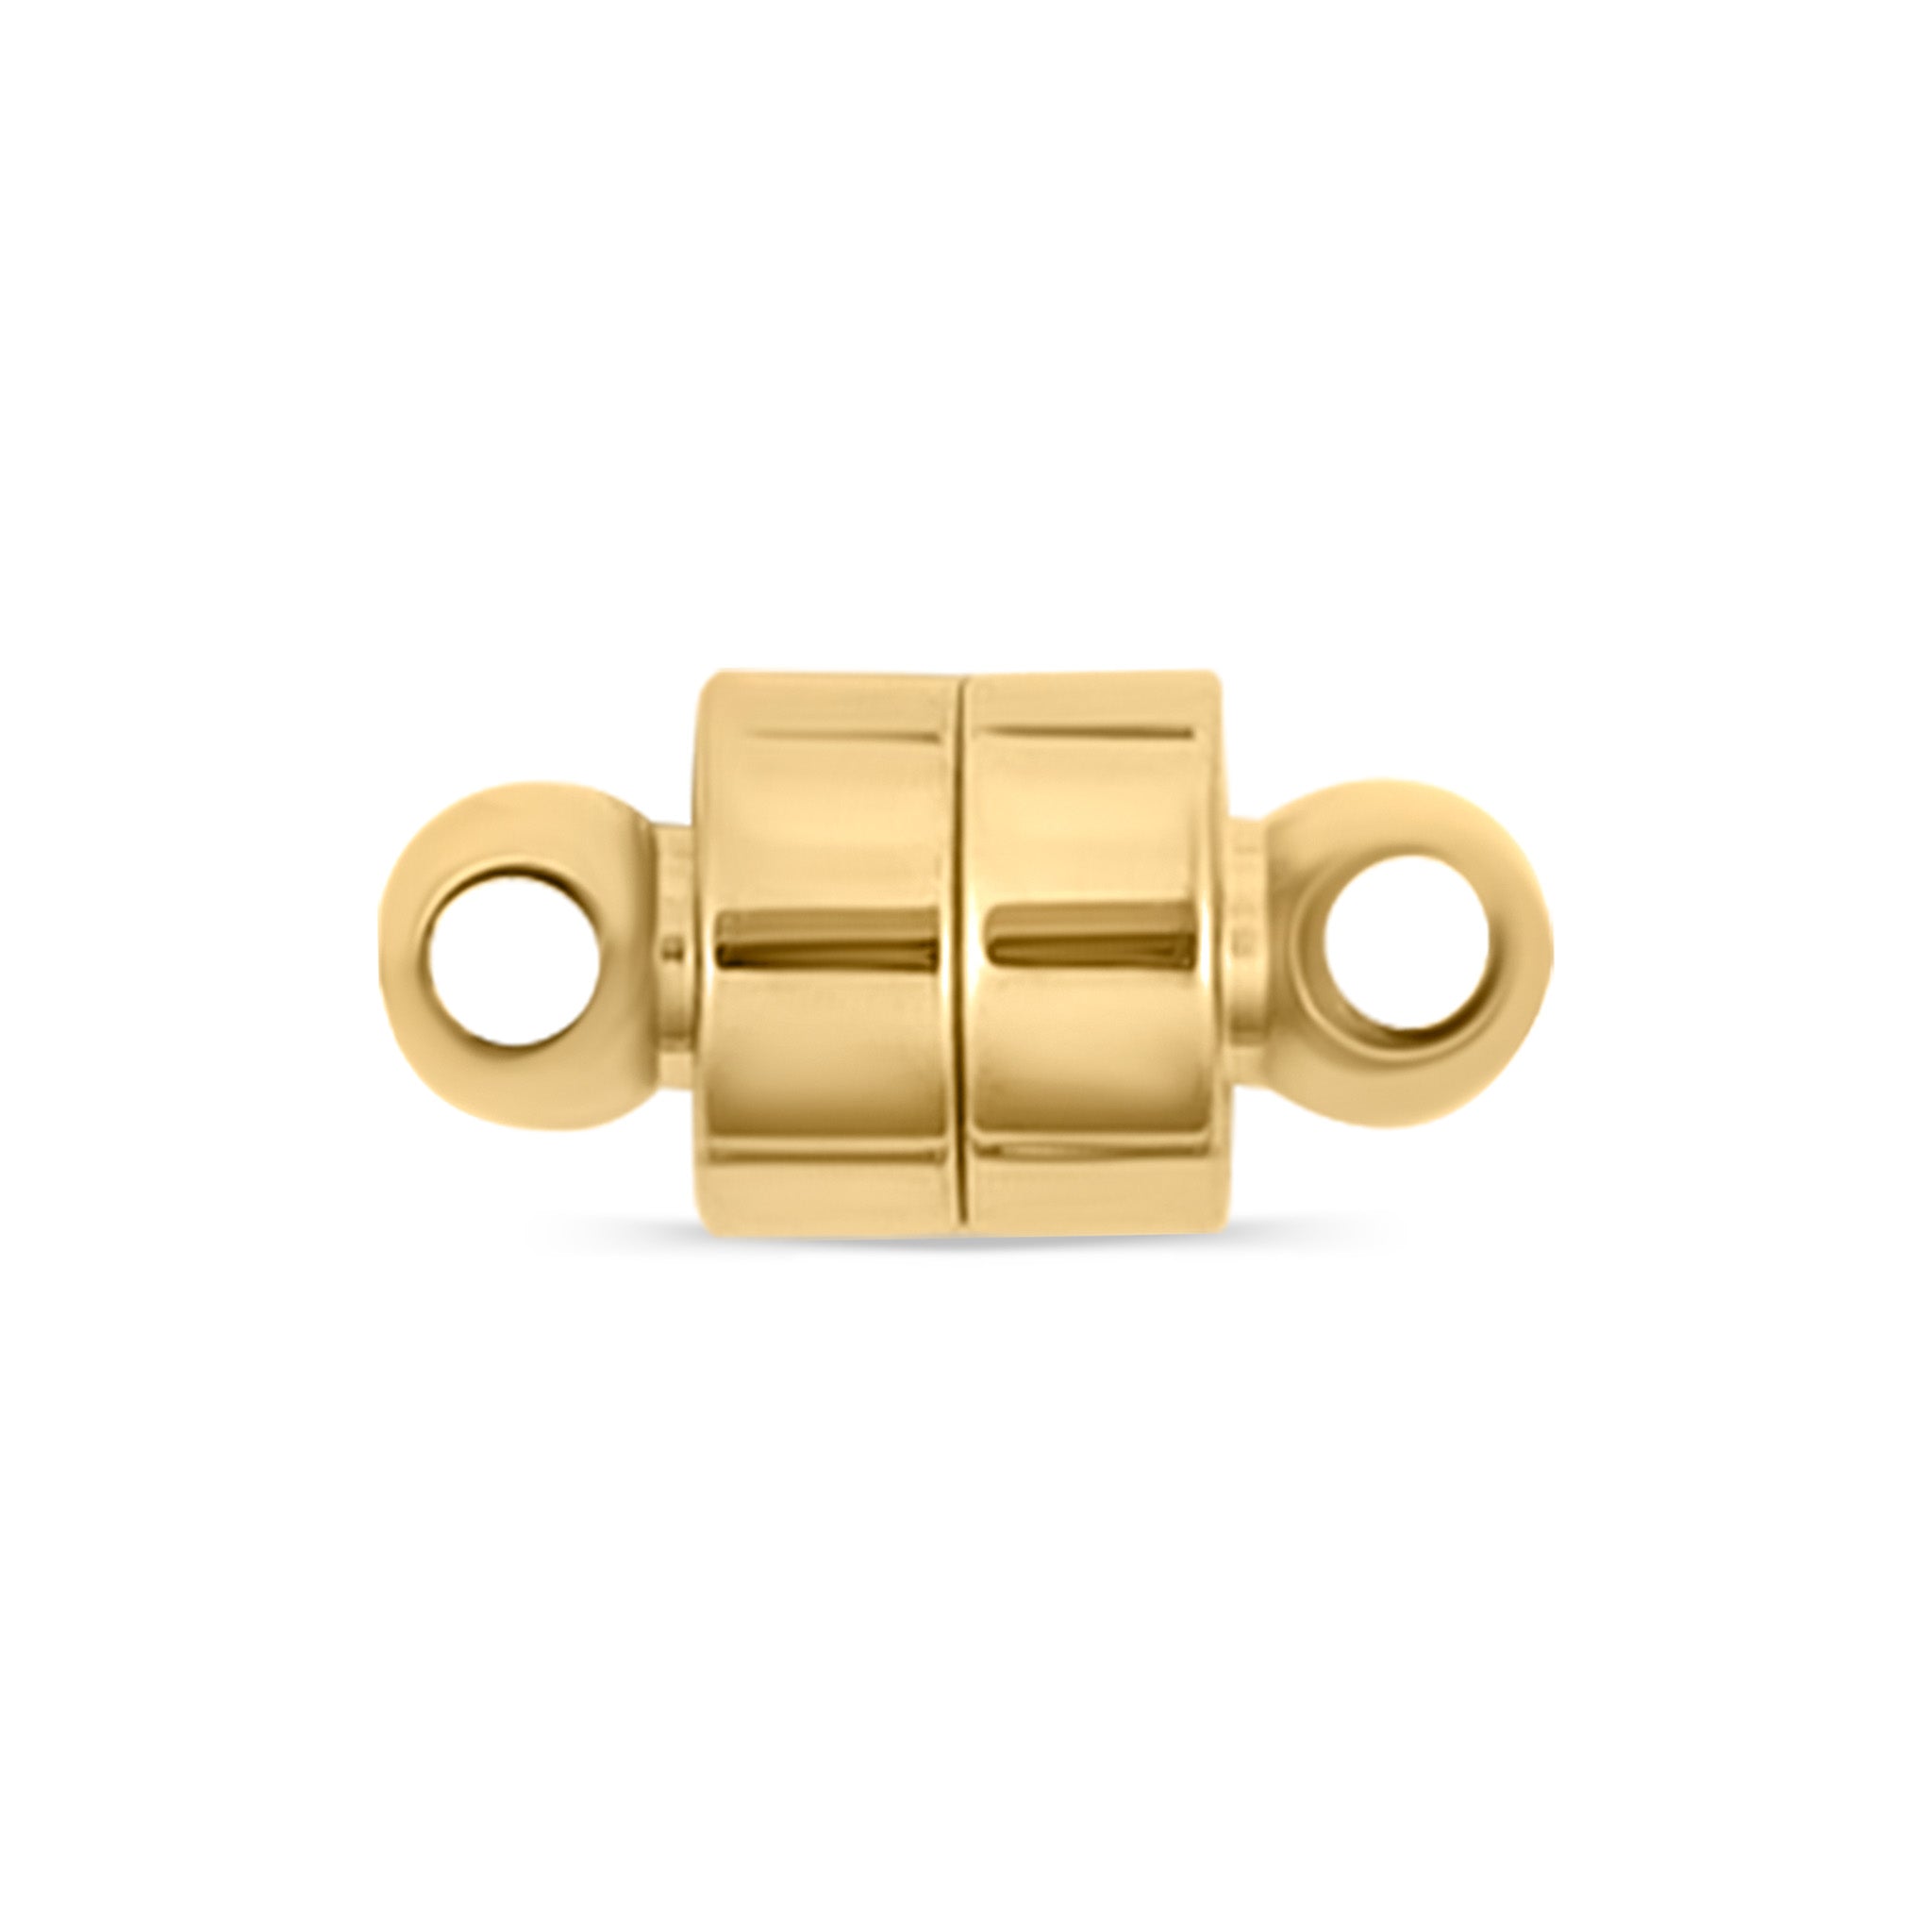 Magnetic Clasp MINI 6mm Gold Plate